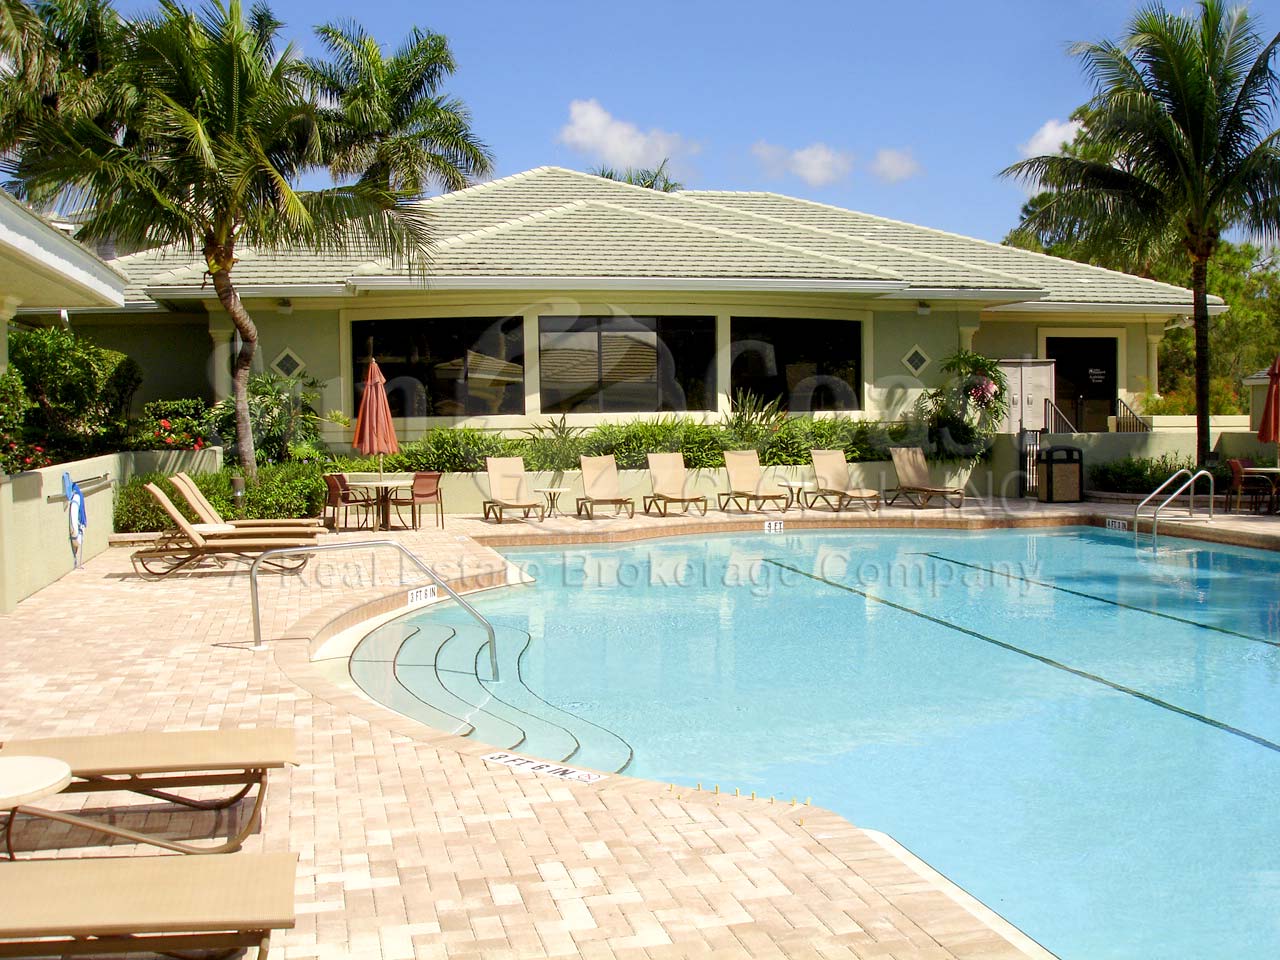 CEDAR HAMMOCK Golf and Country Club community pool and fitness center